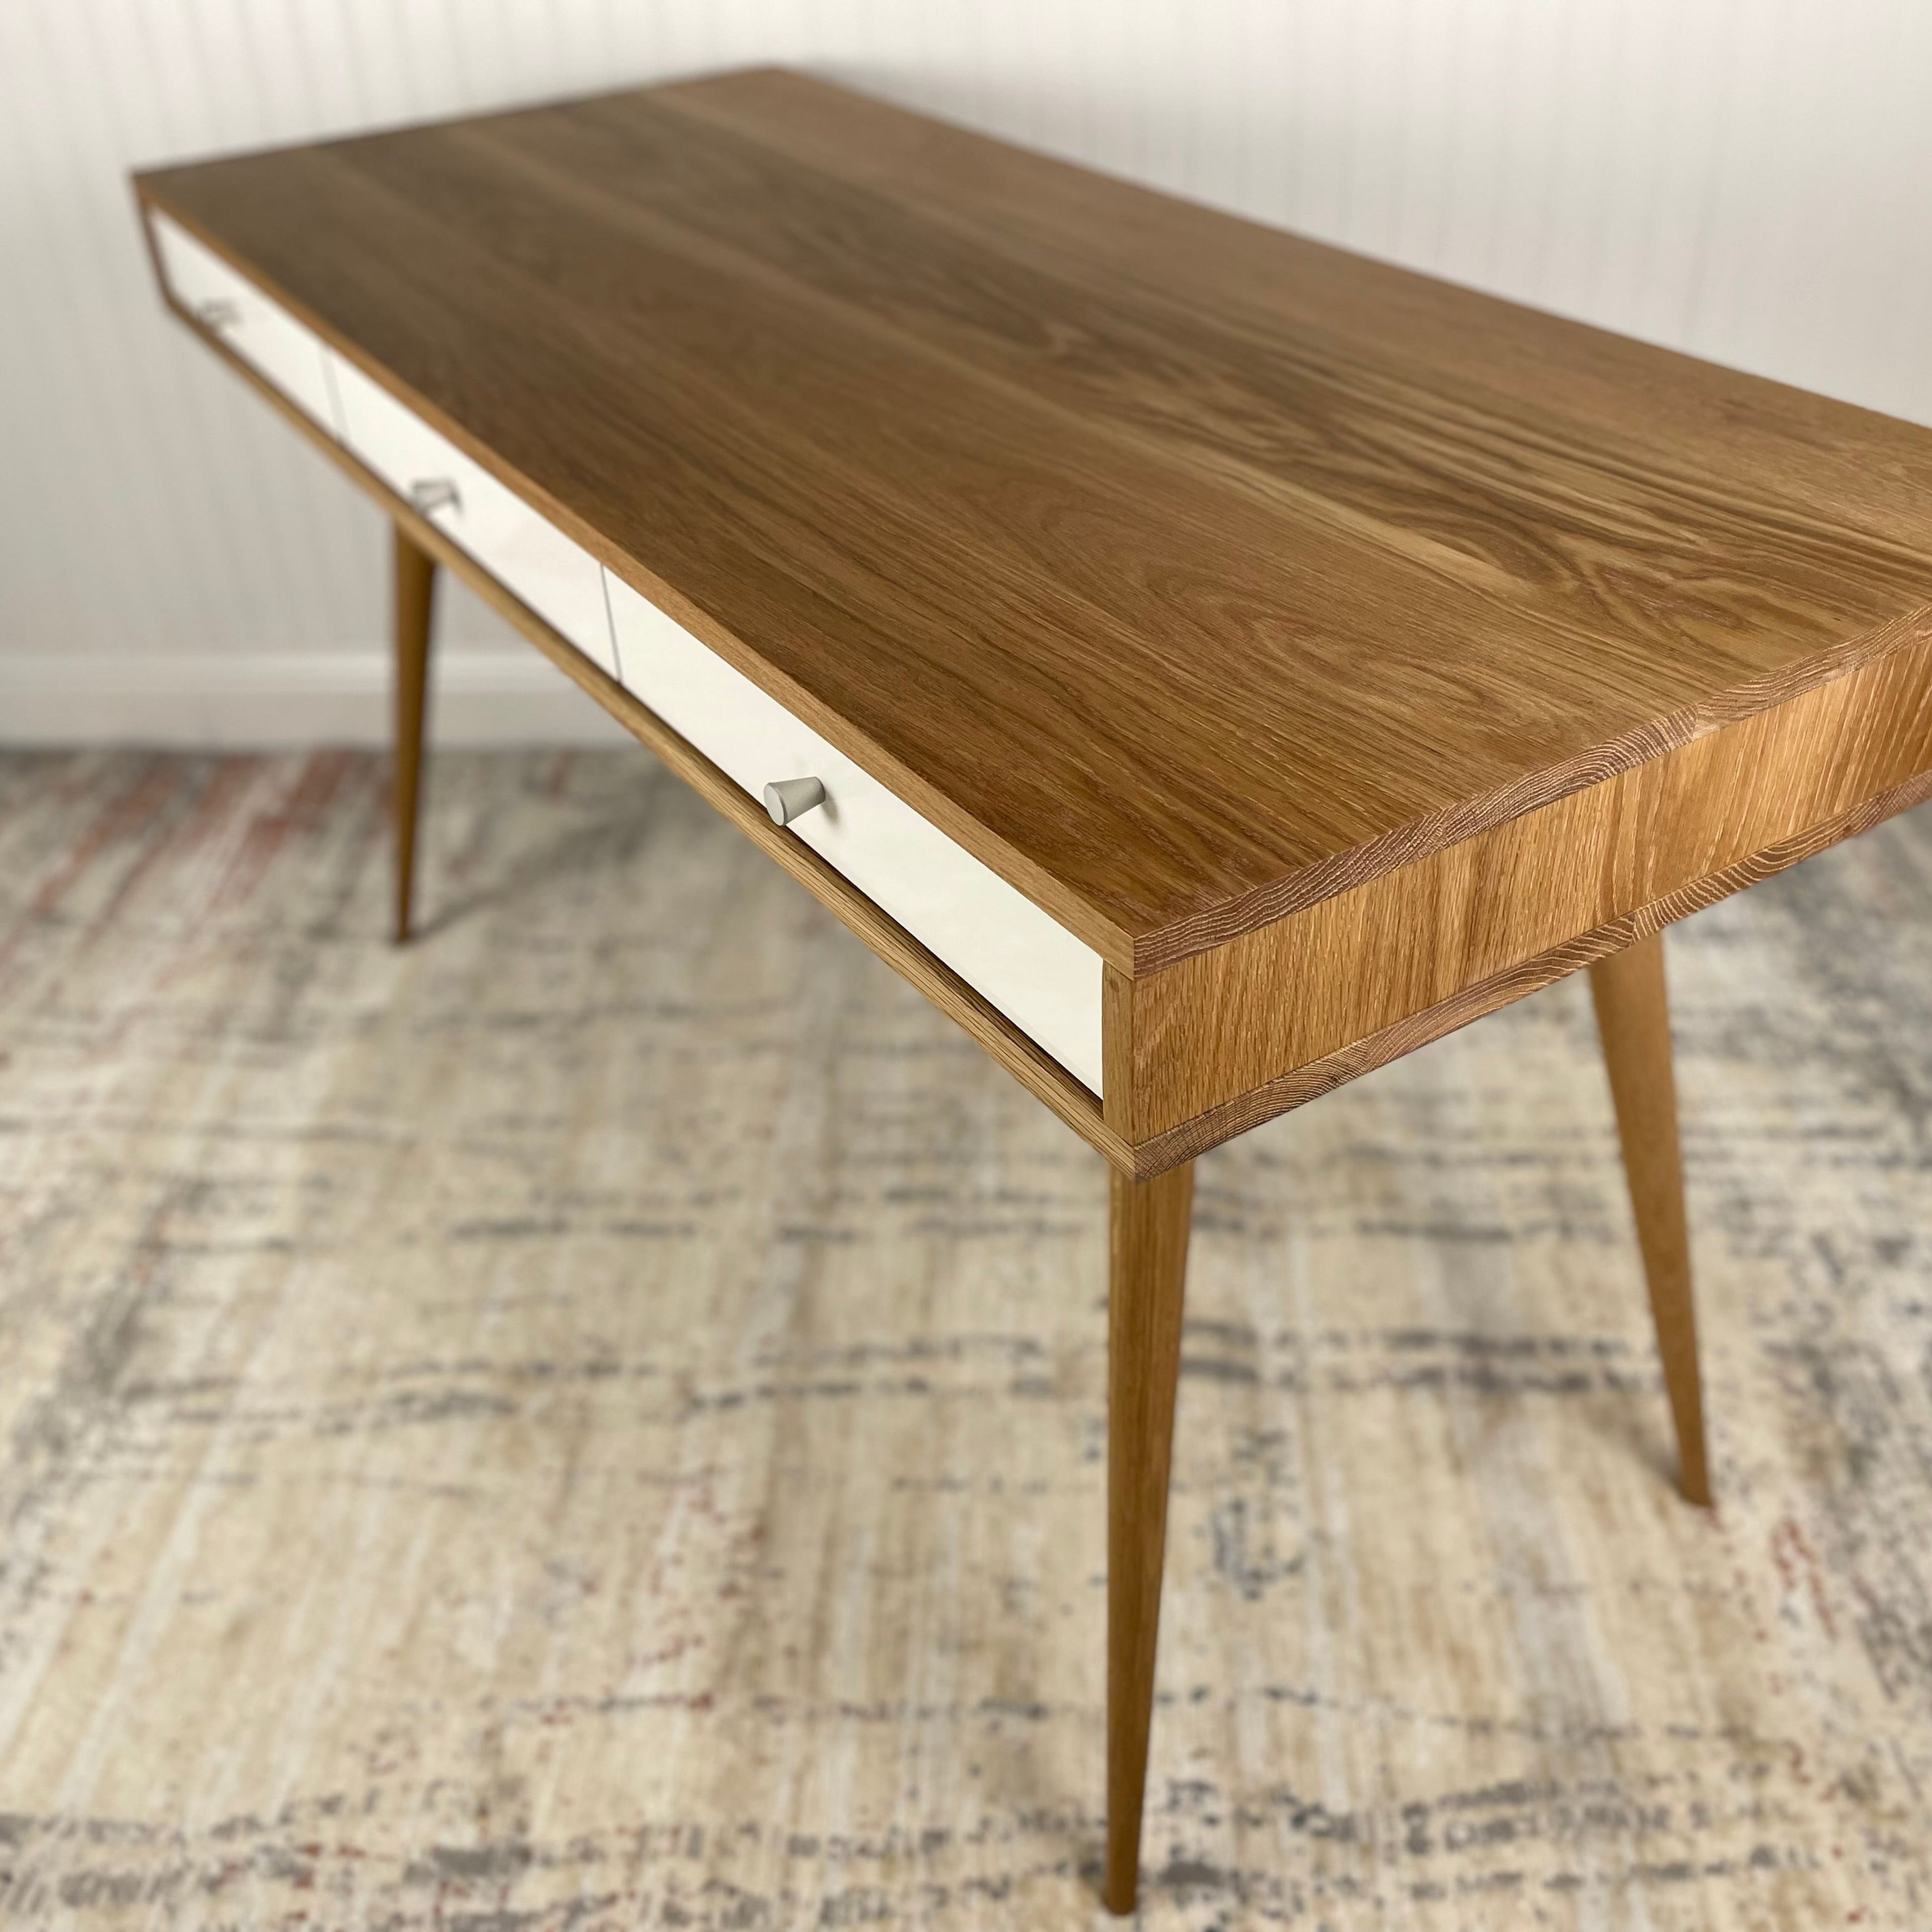 White Oak Mid Century Desk with Cord Management Available now!